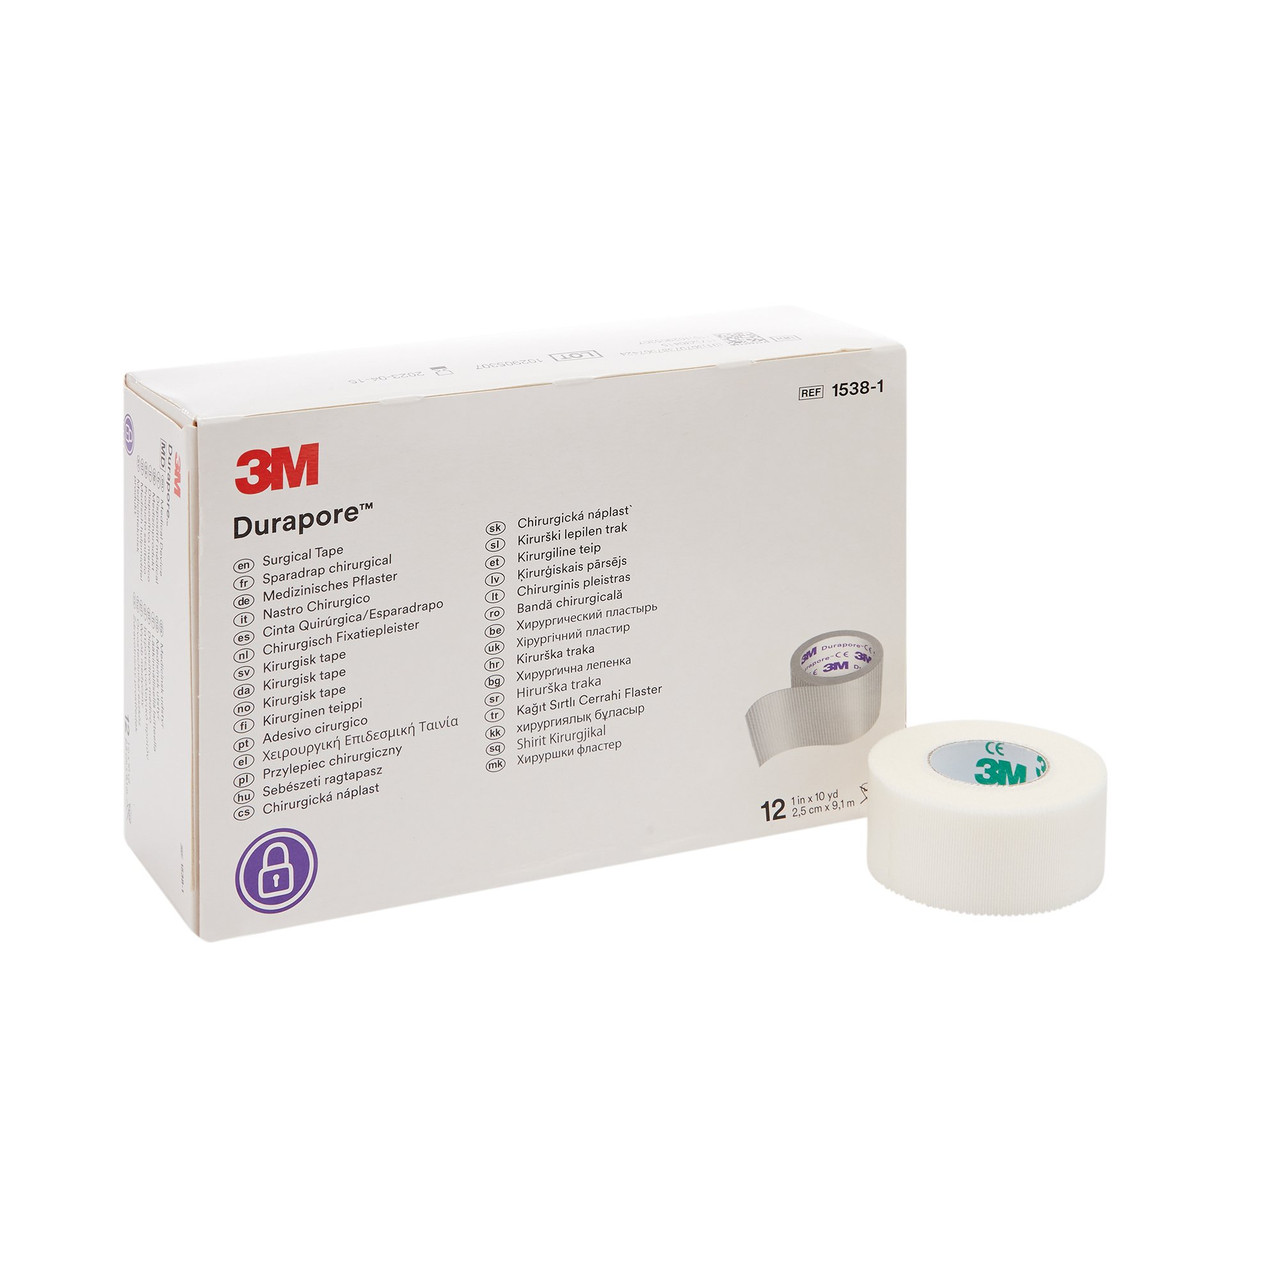 3M Medical Tape 3M Medipore H Perforated Soft Cloth 1 Inch X 2 Yard White  NonSterile, 72/CS